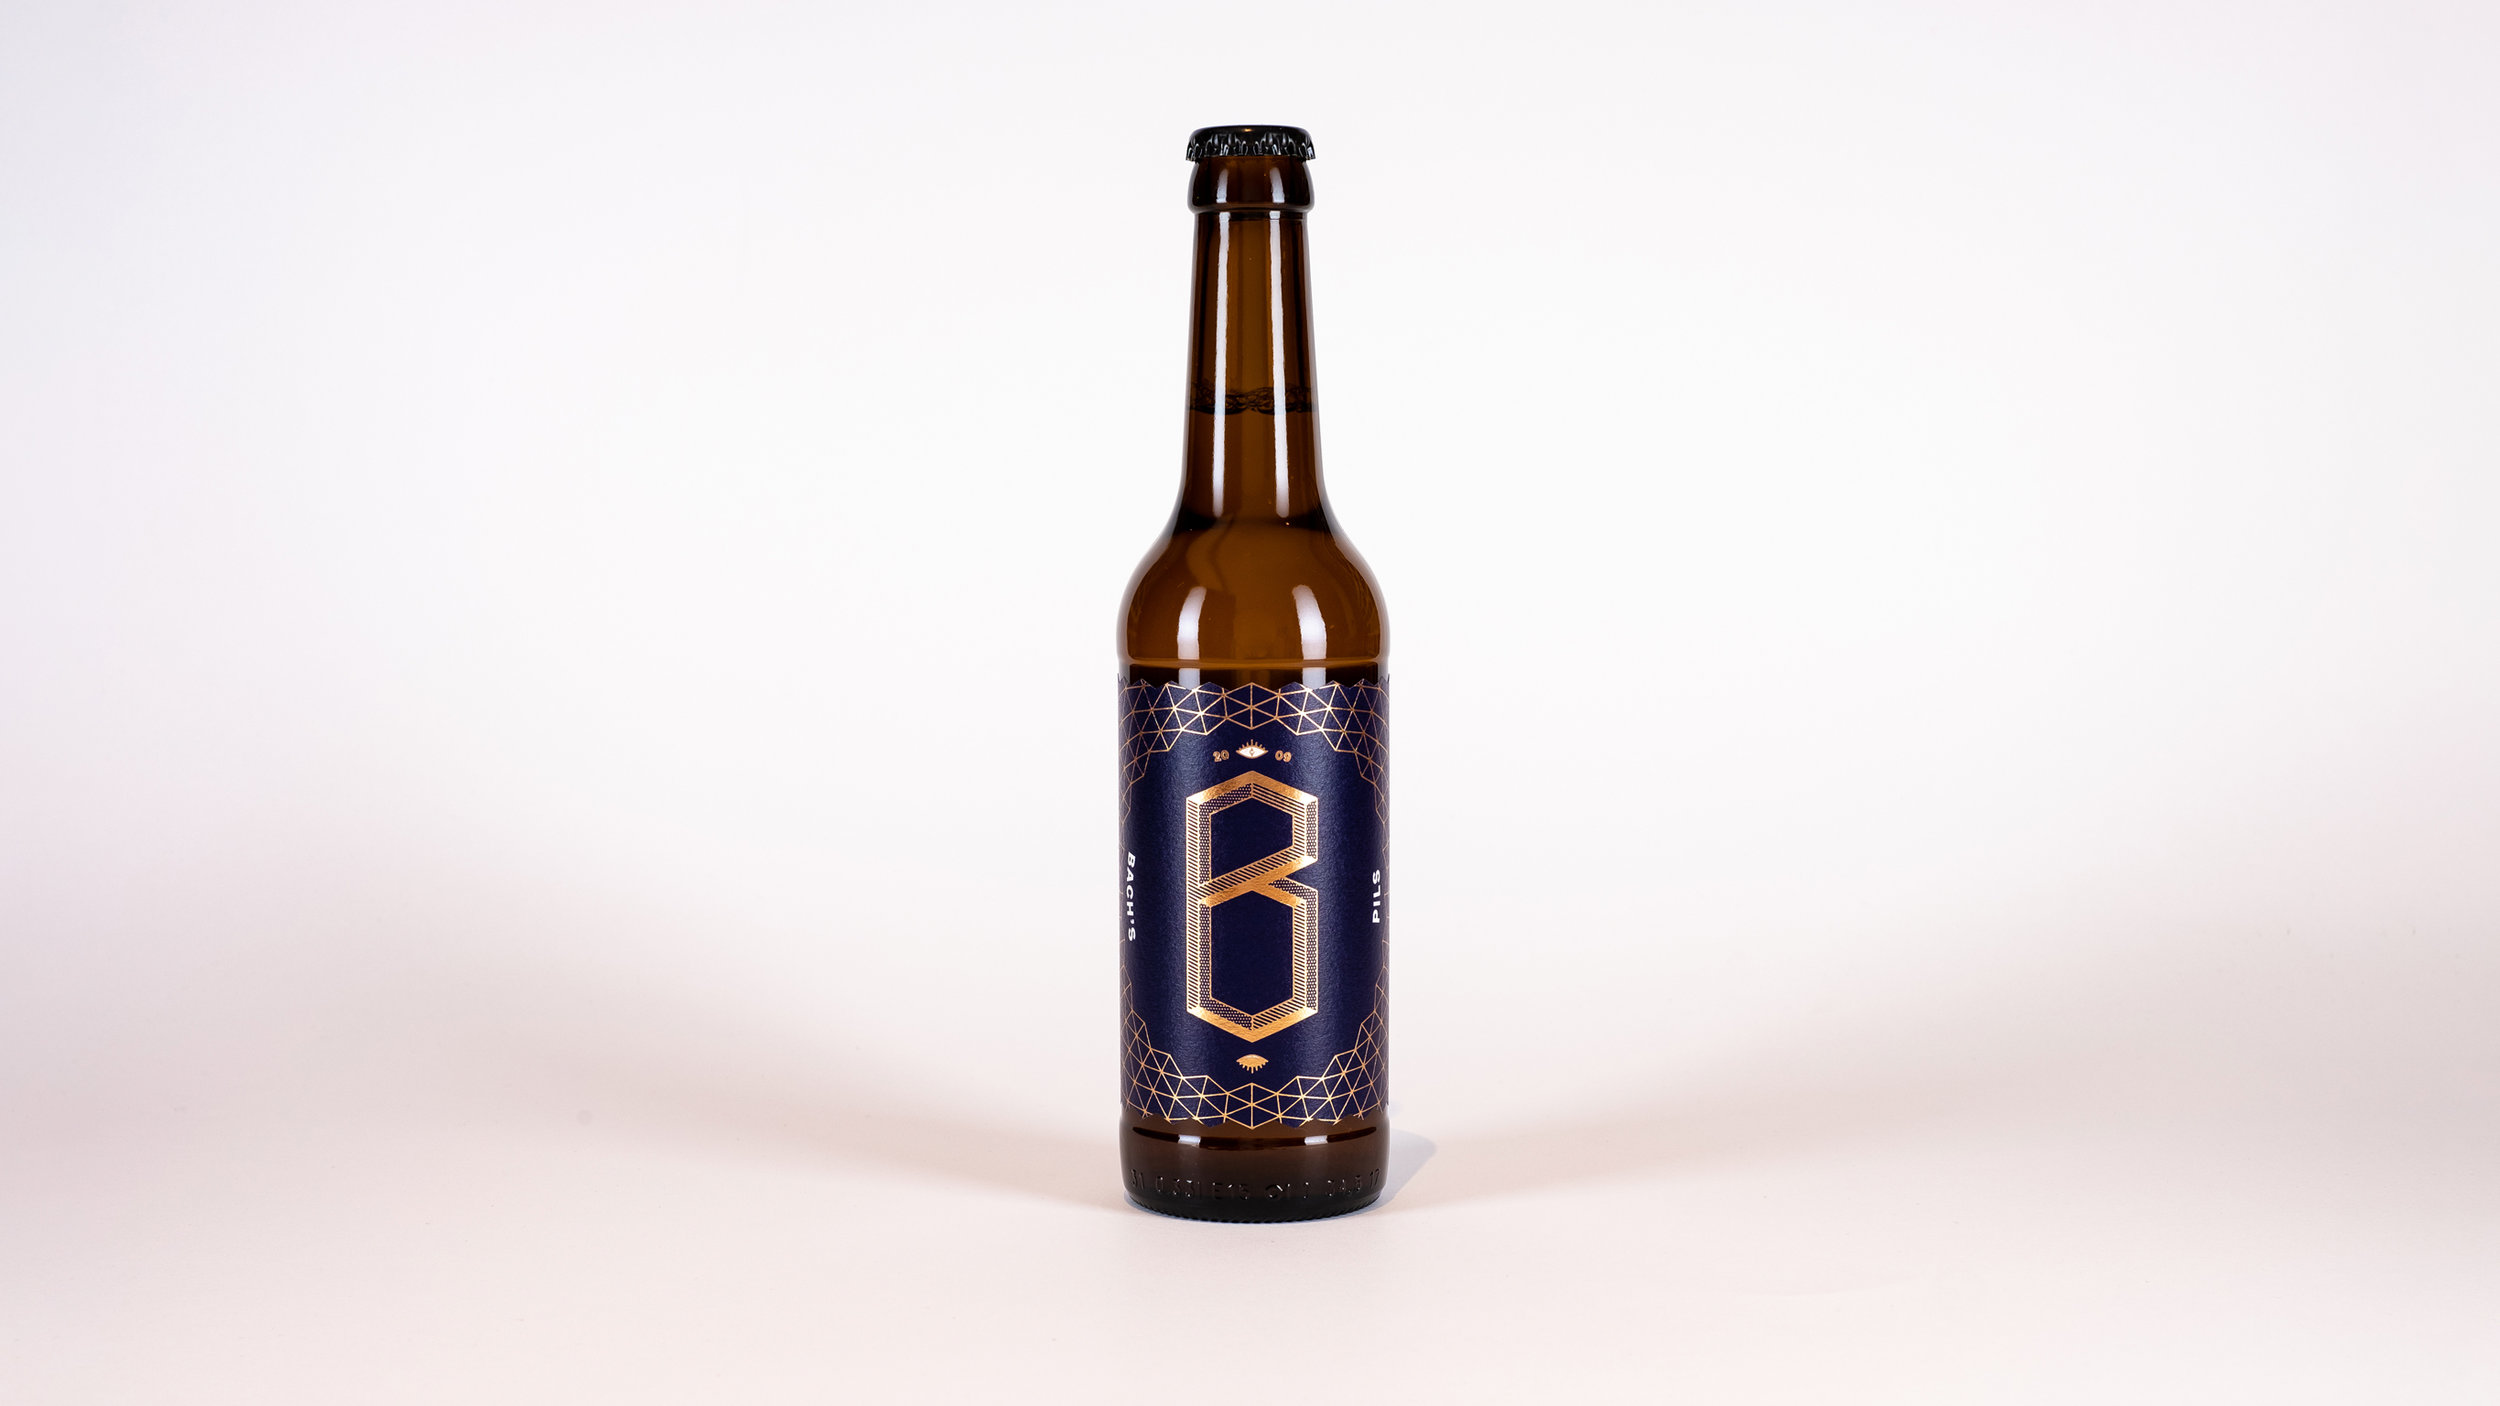 Branding and Packaging Design for the german Brewery Bach’s